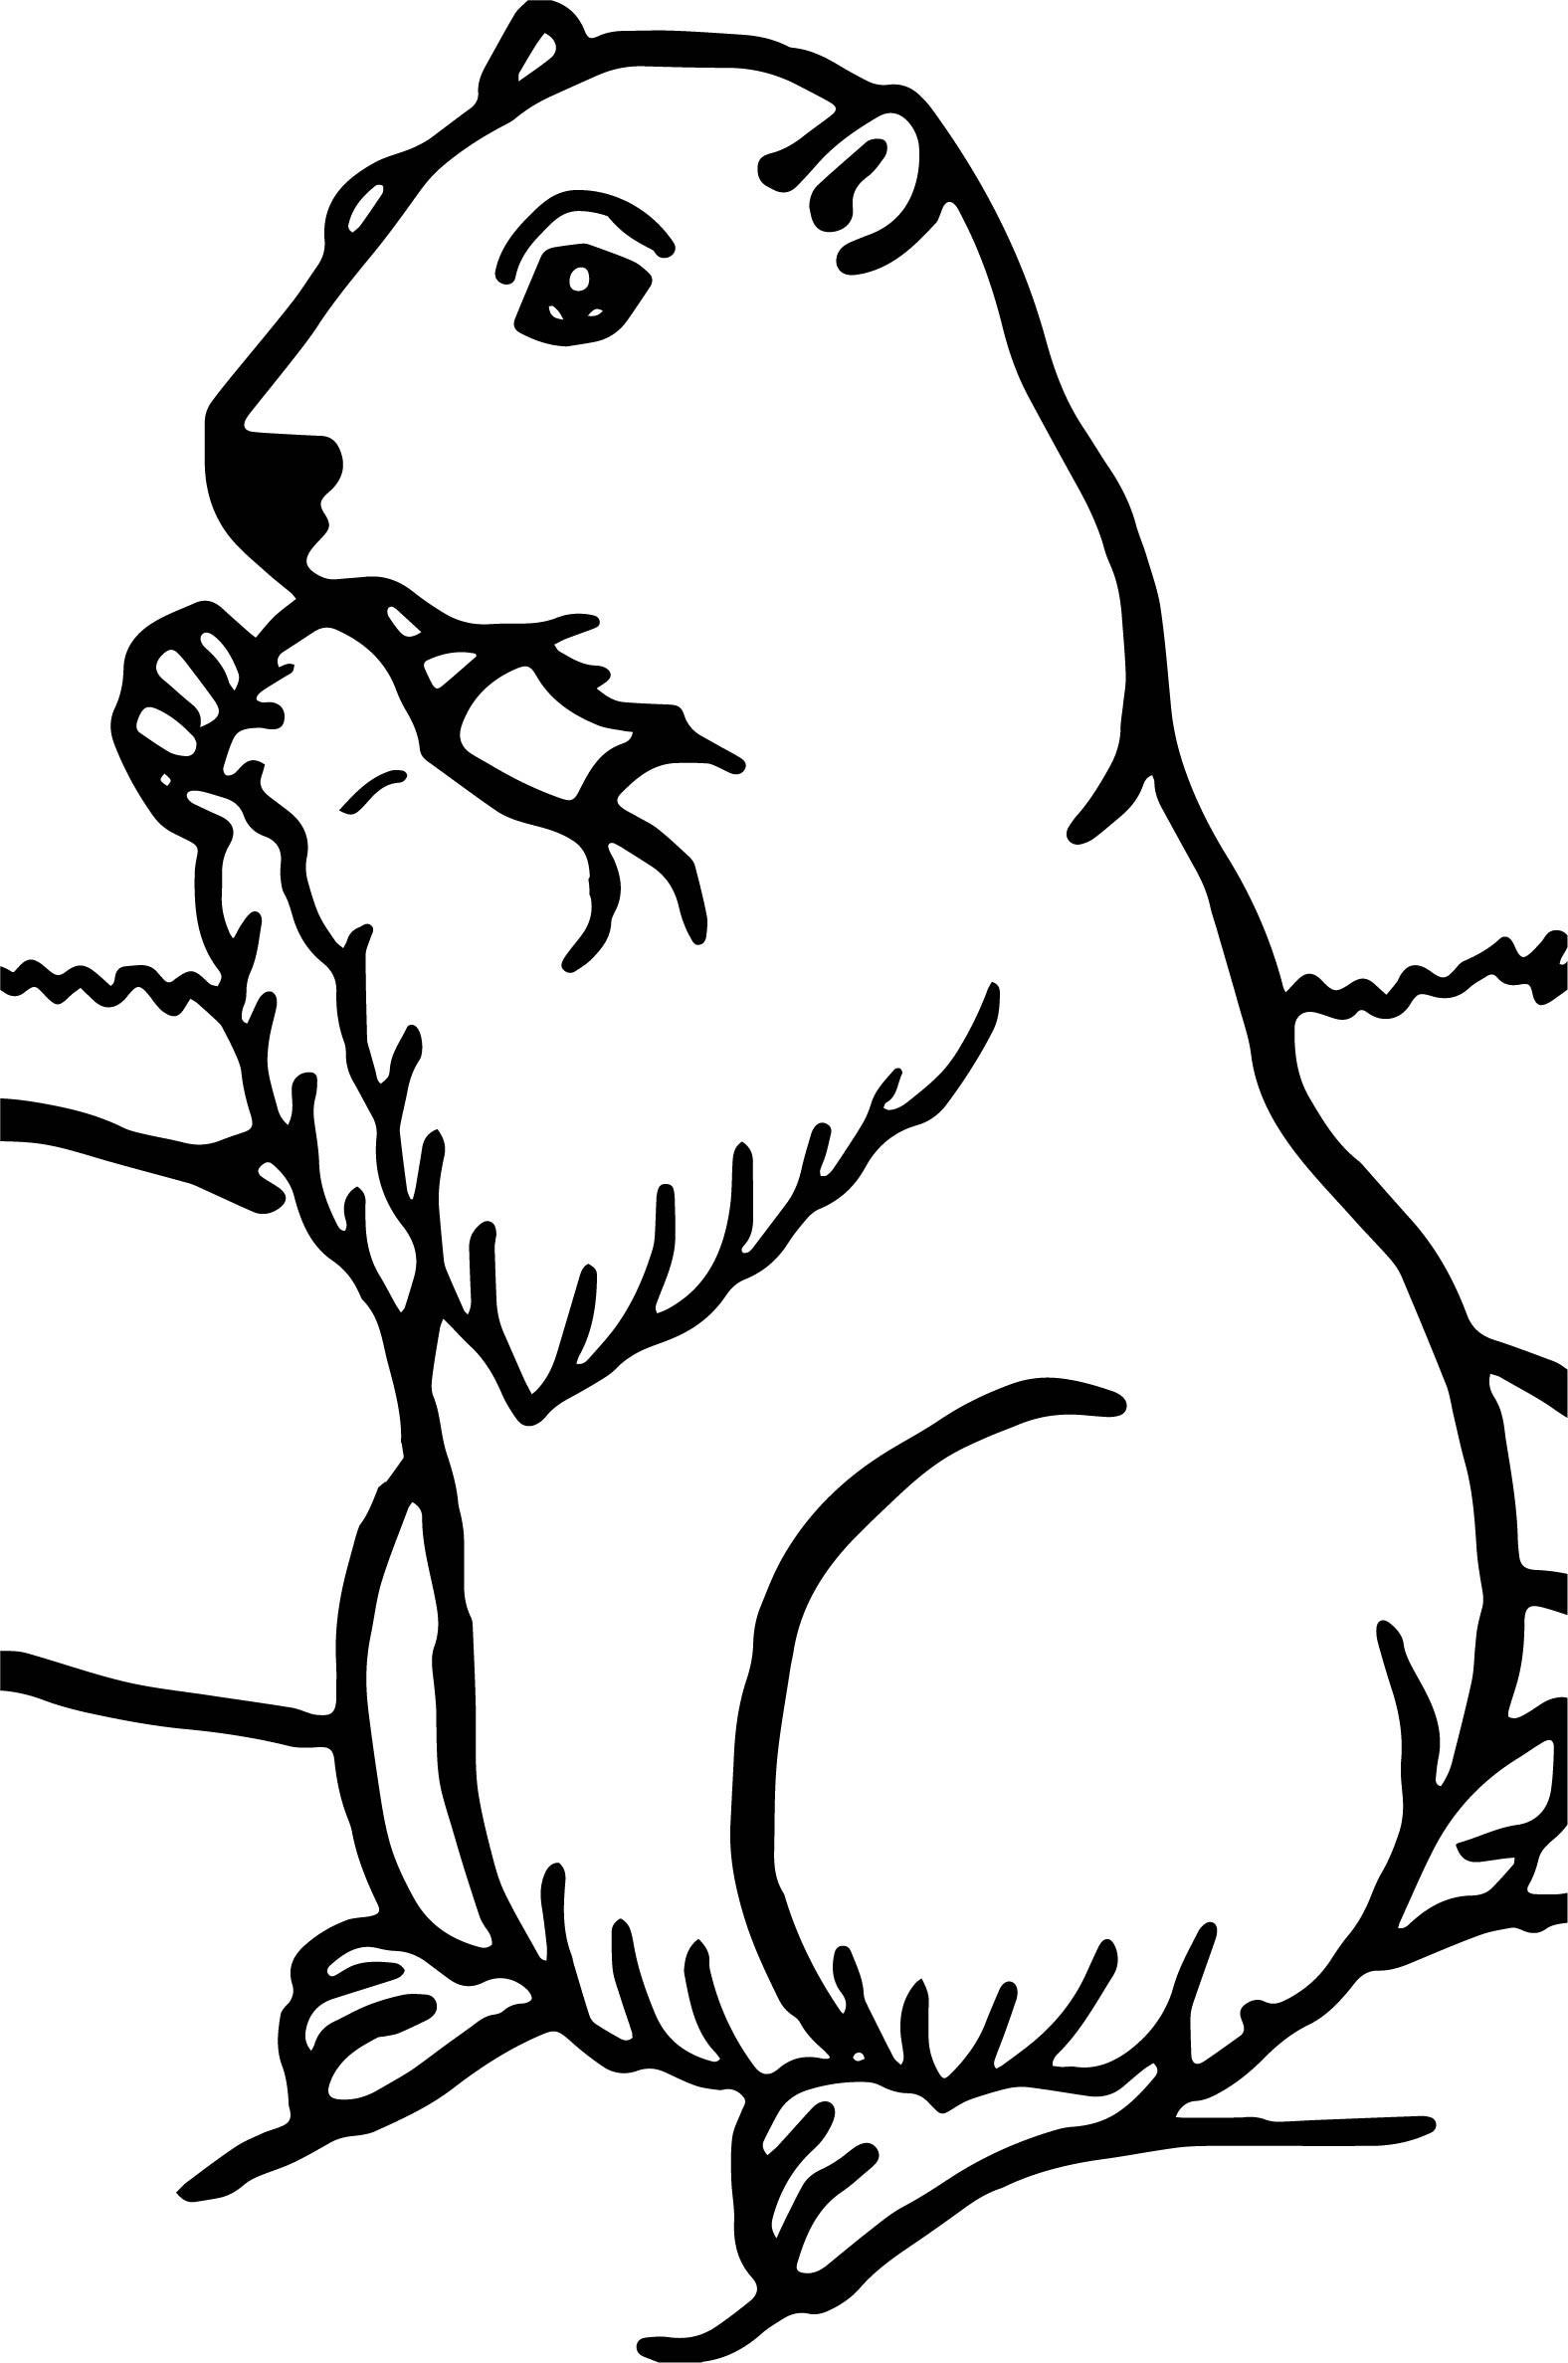 woodchuck-coloring-page-at-getdrawings-free-download